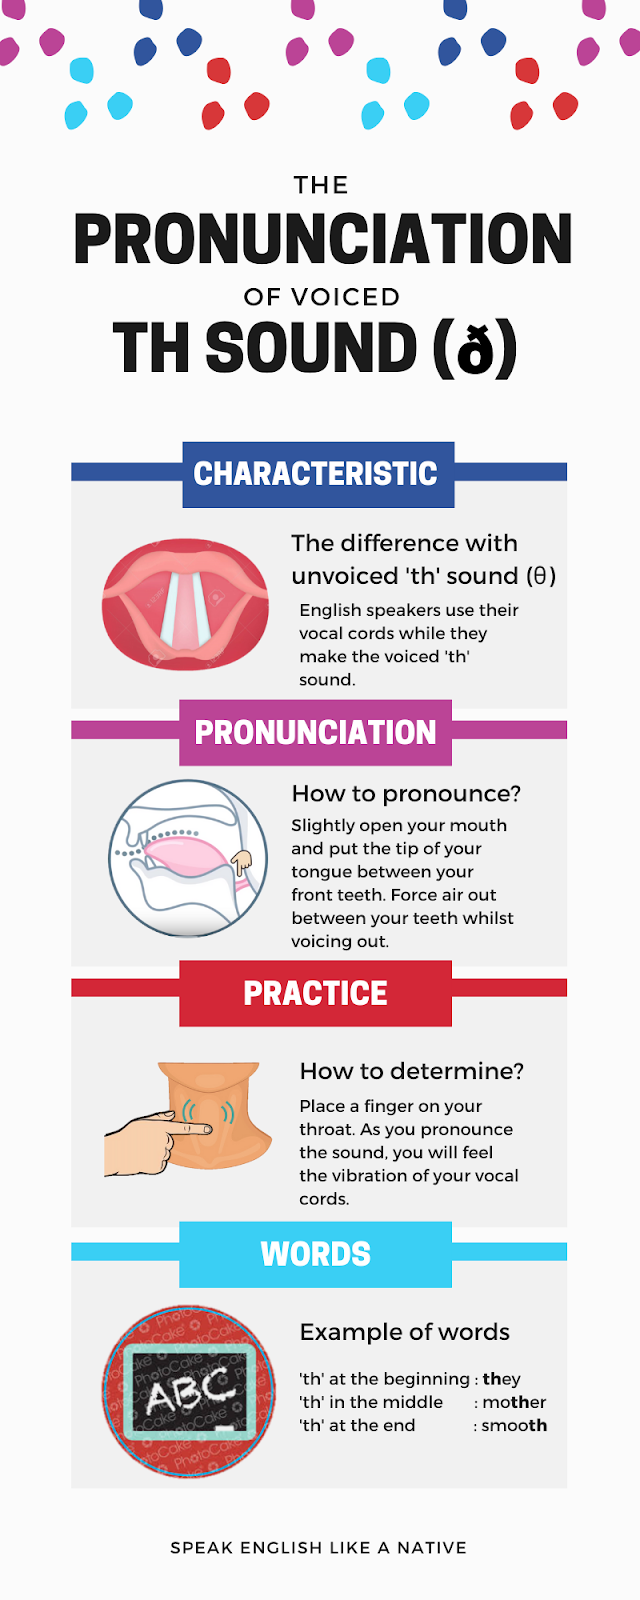 How to pronounce voiced TH /ð/ and voiceless TH /θ/ sounds